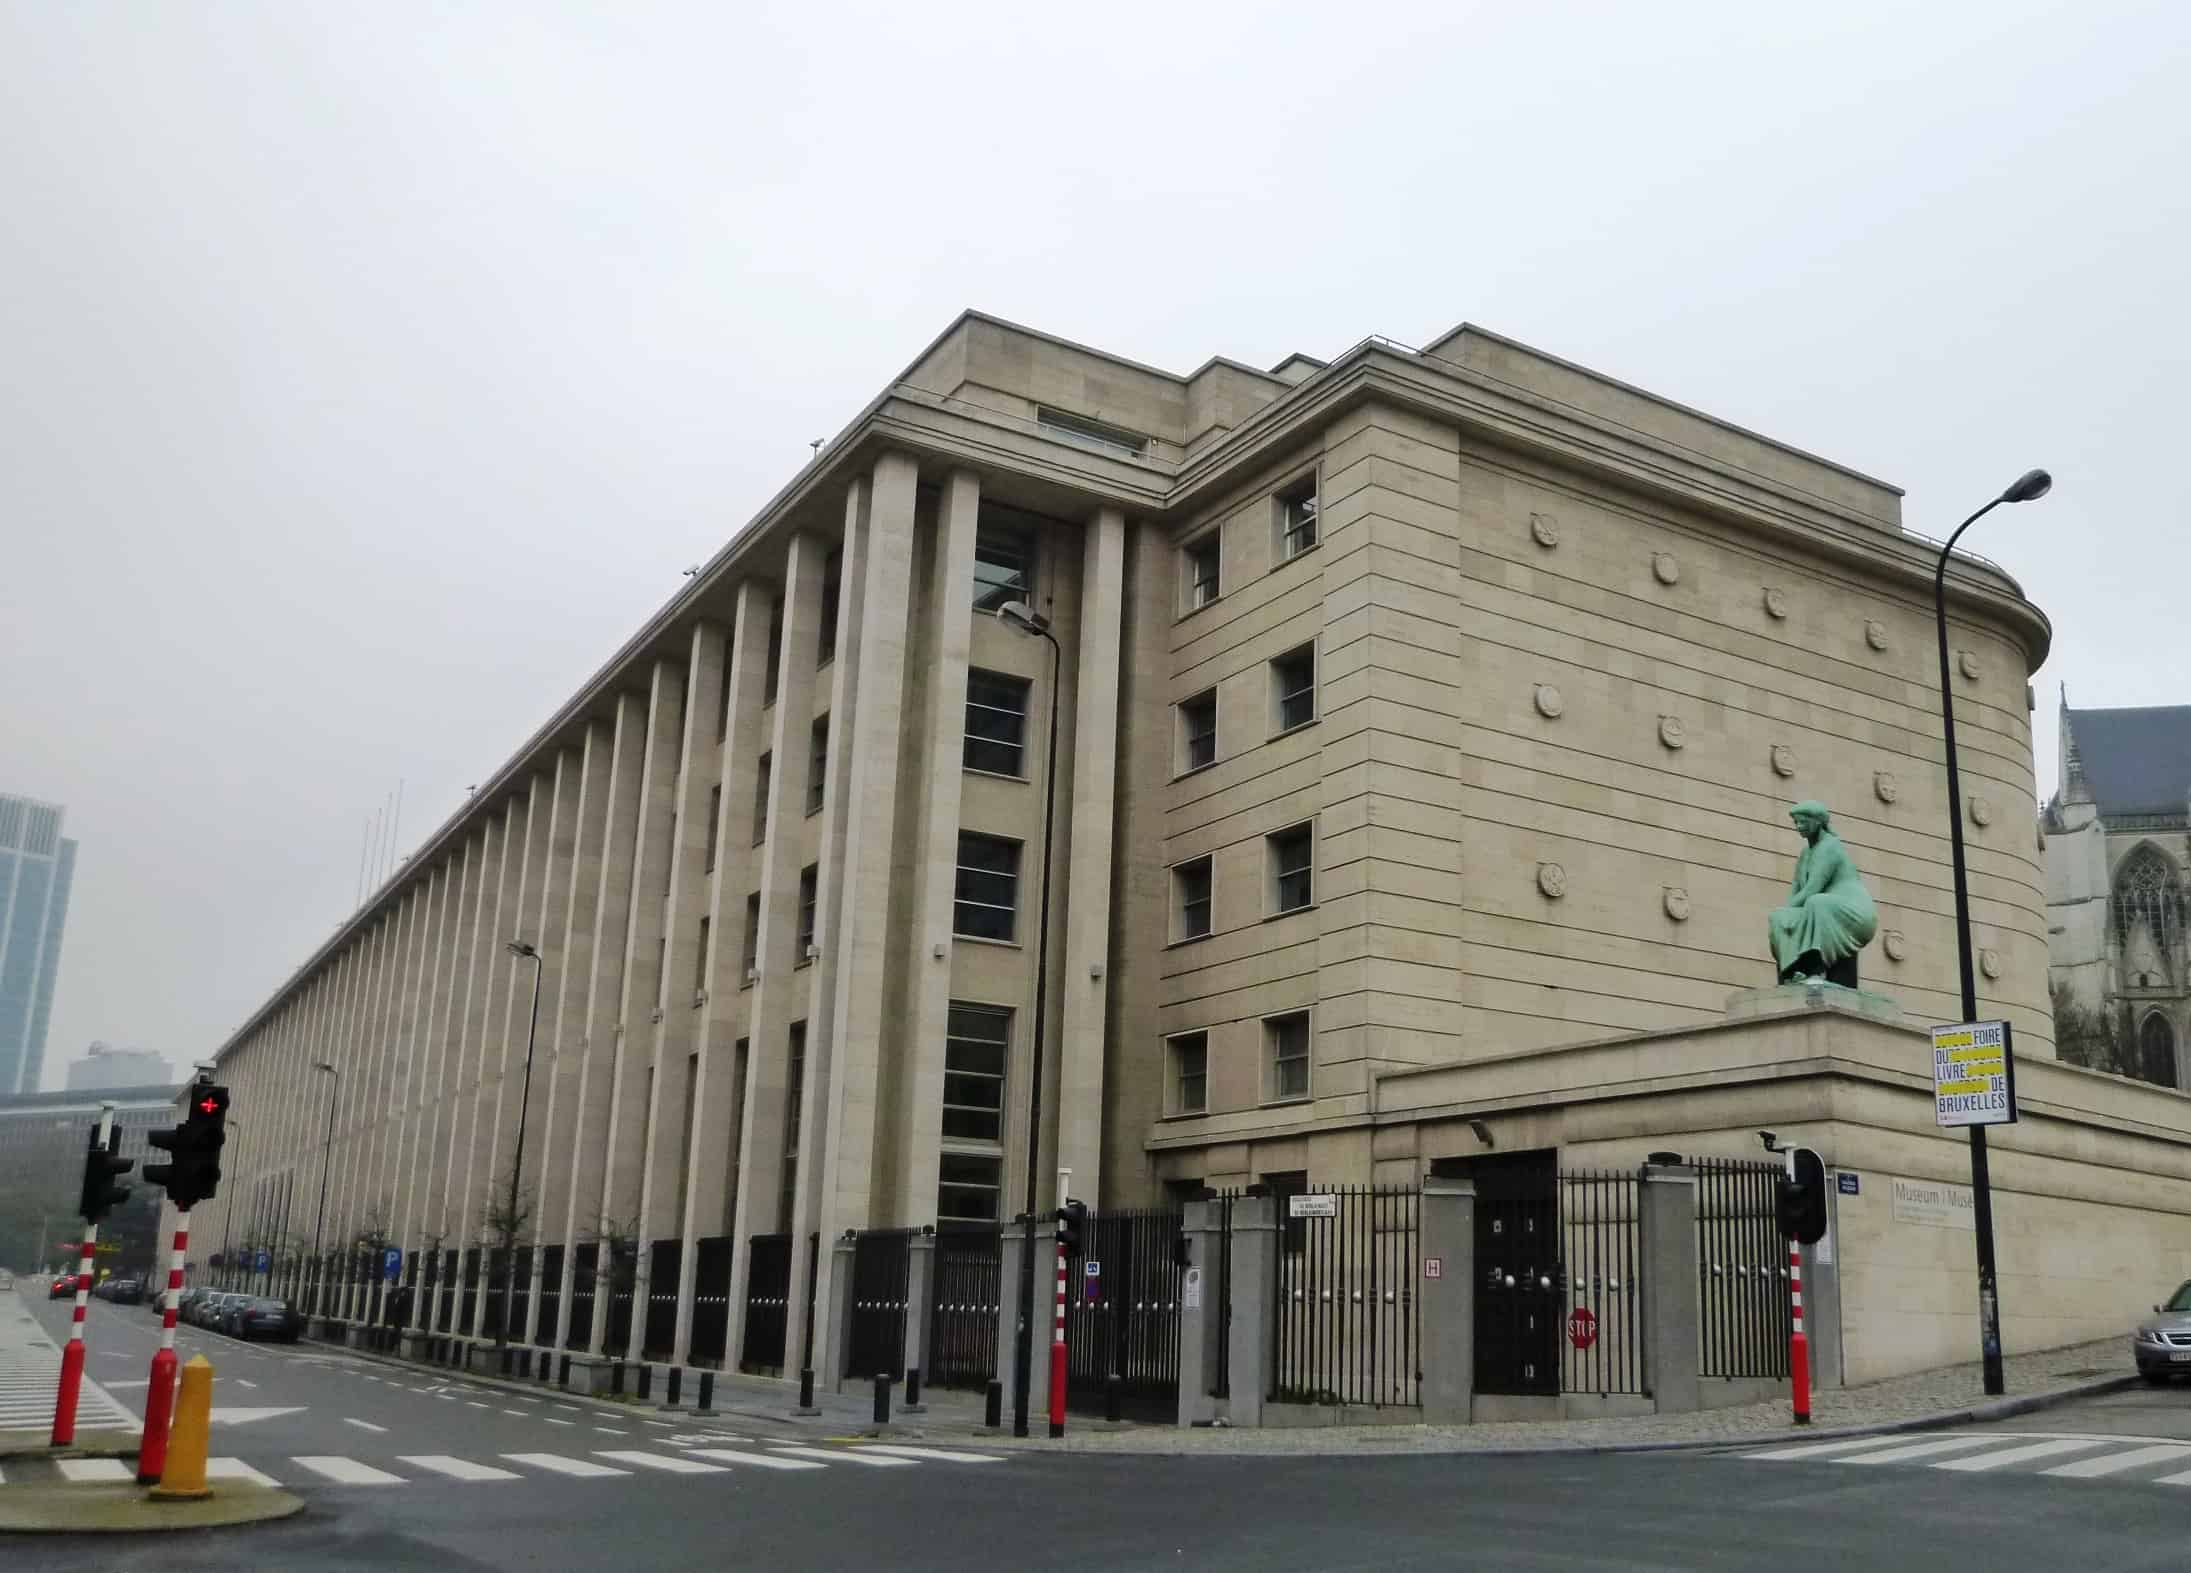 Central bank of Belgium